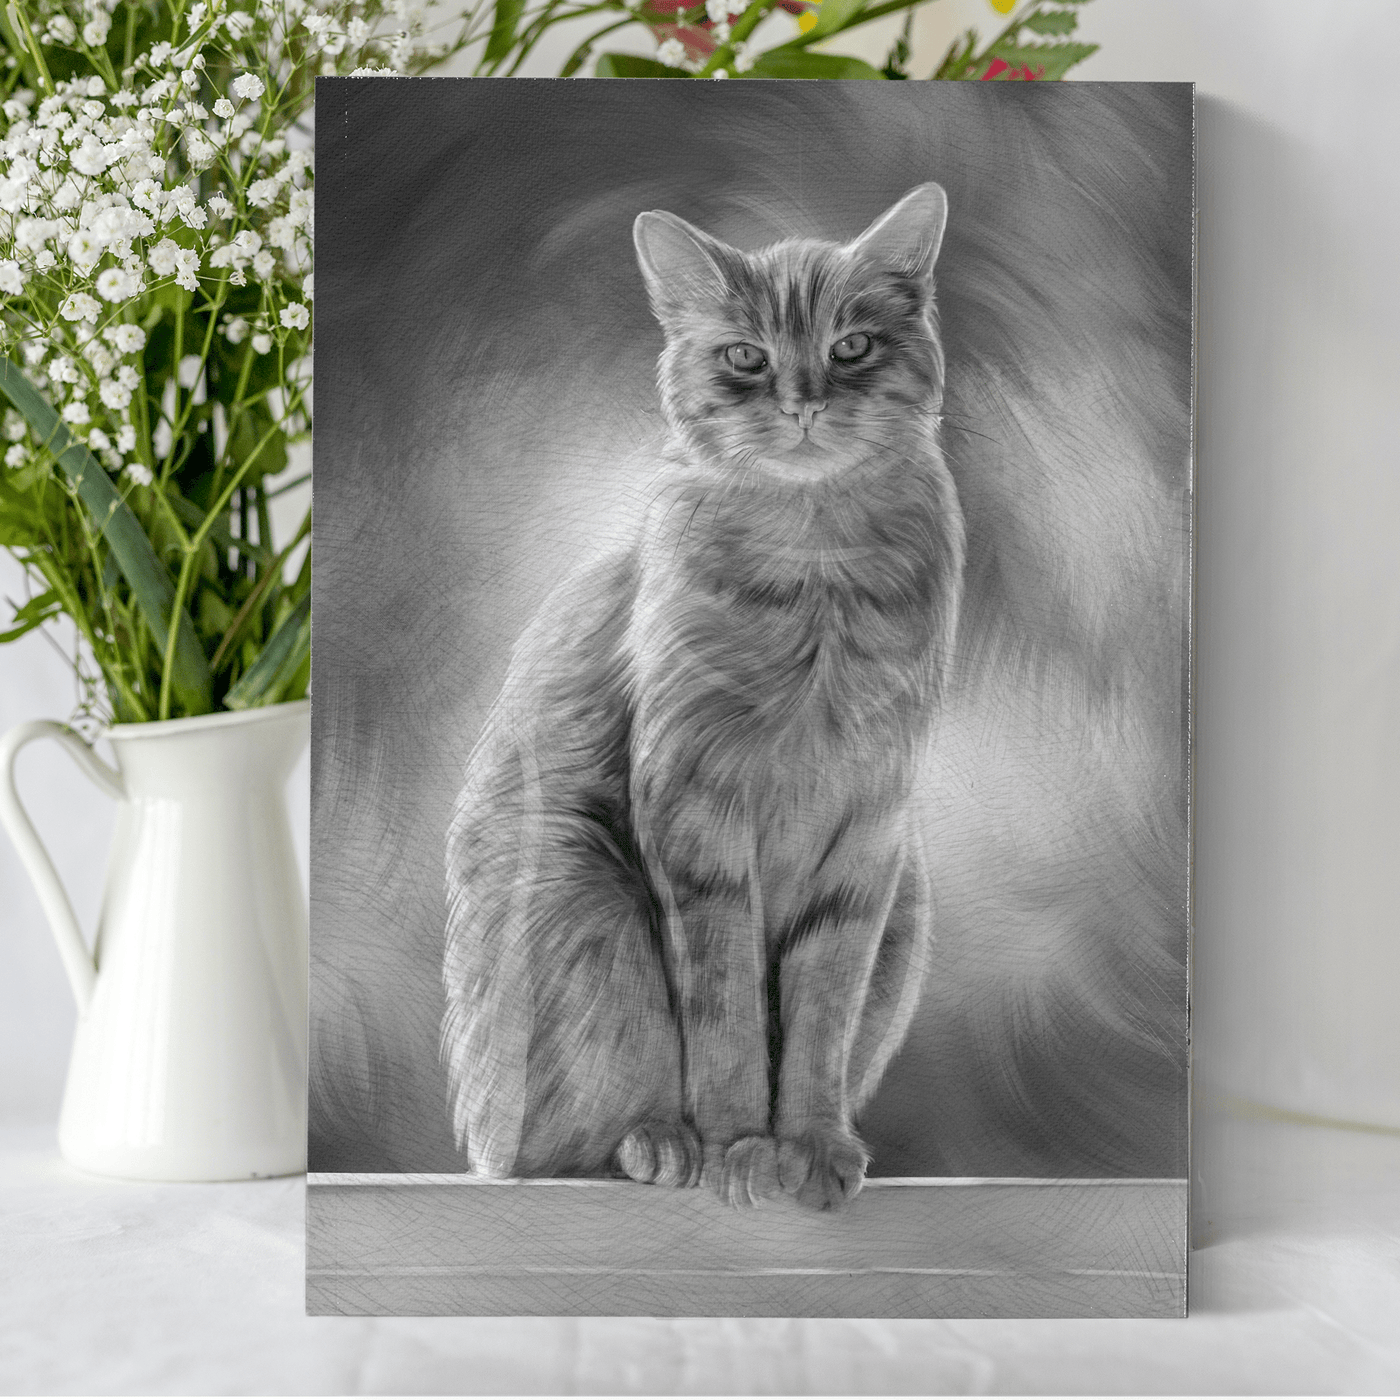 cat charcoal portrait of an adorable fur cat drawn in black and white